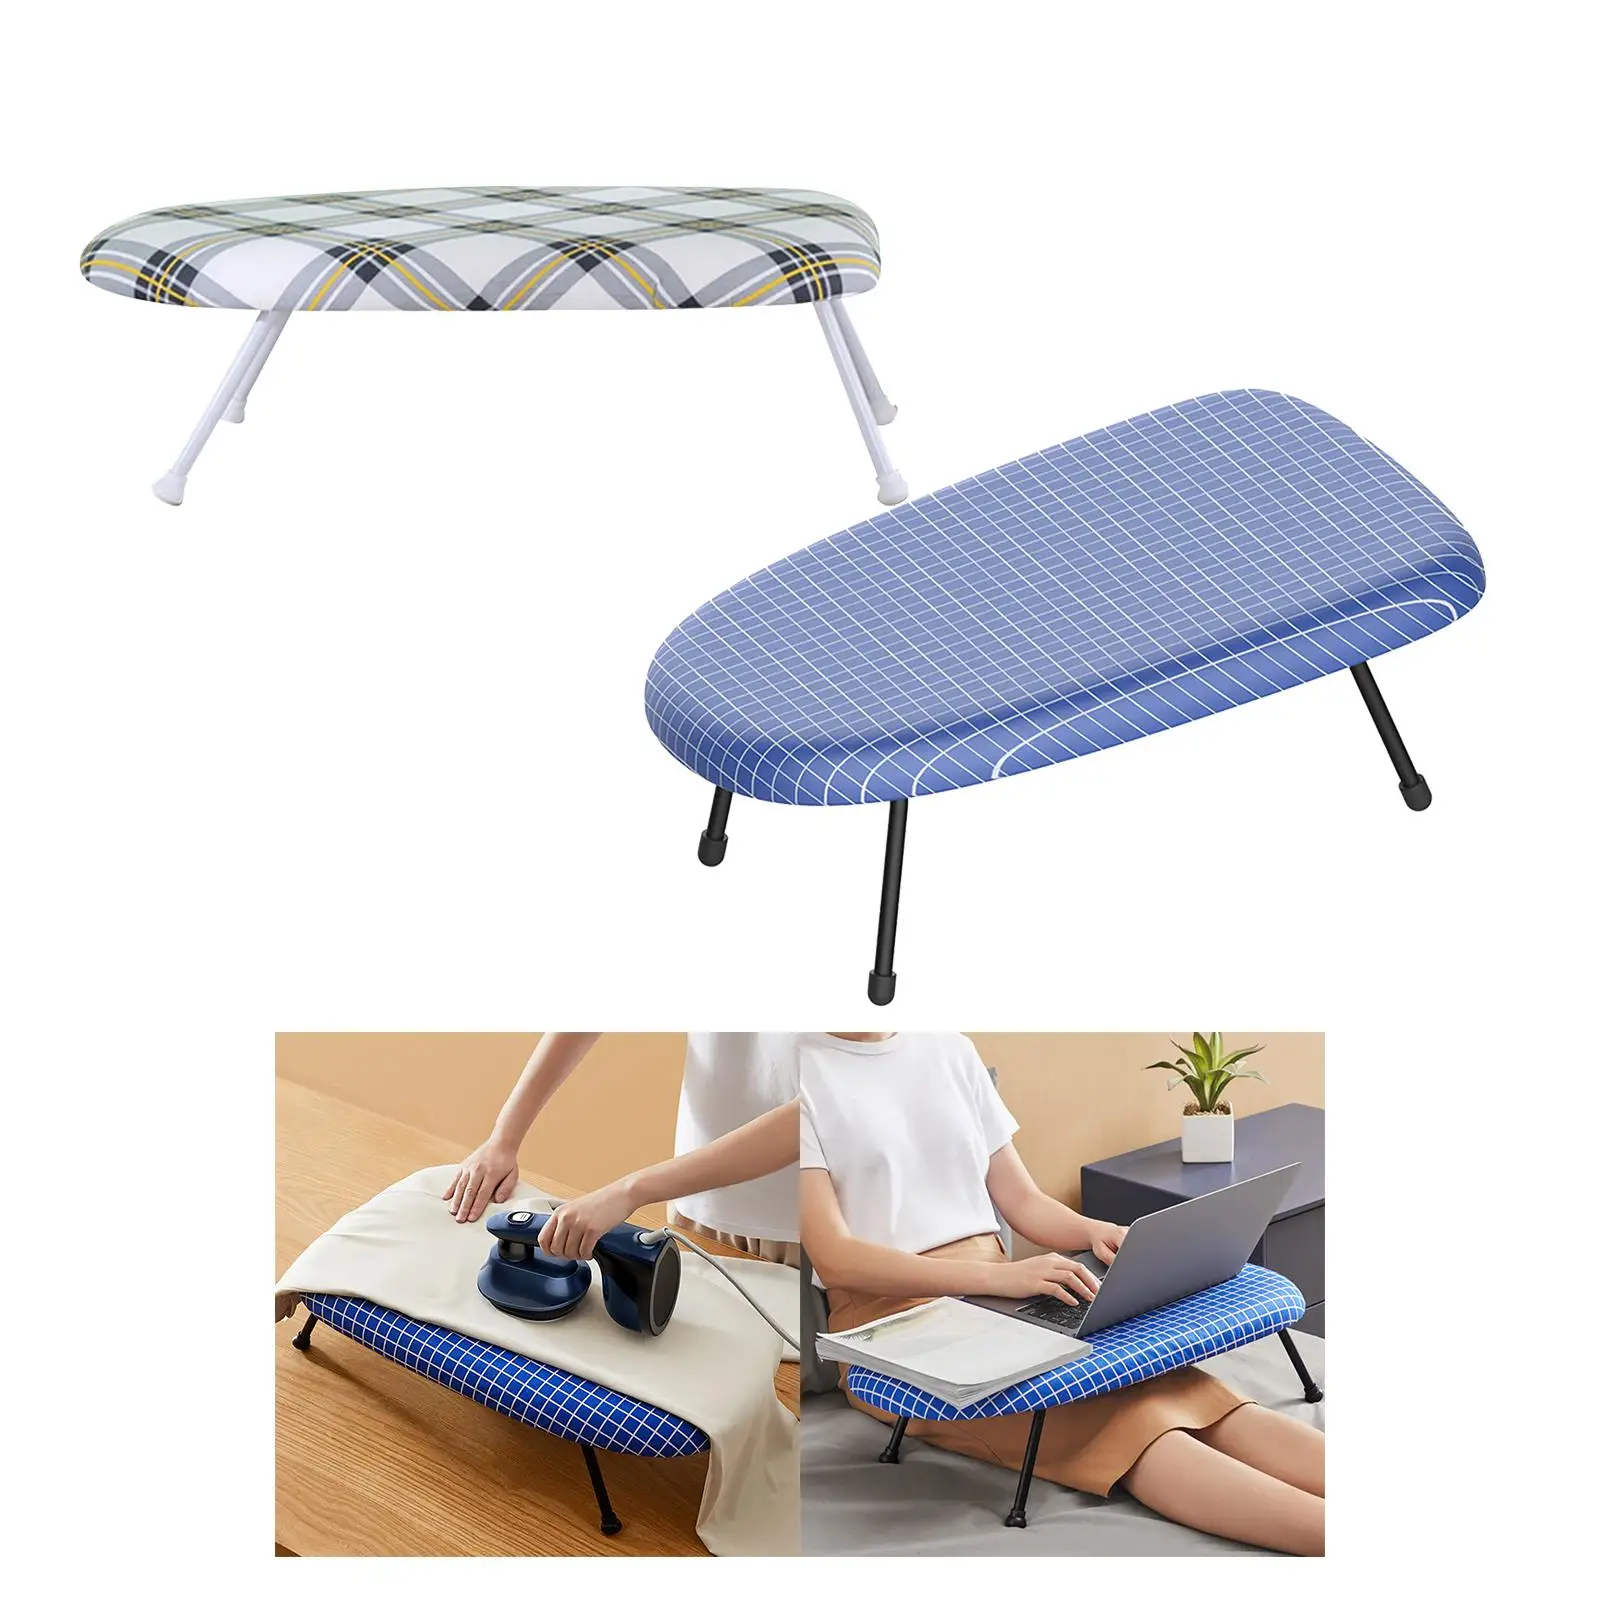 Mini Ironing Board for Ironing Cuffs Shirt Neckline Sleeves Foldable Countertop Ironing Board for Apartment Dorm Laundry Home